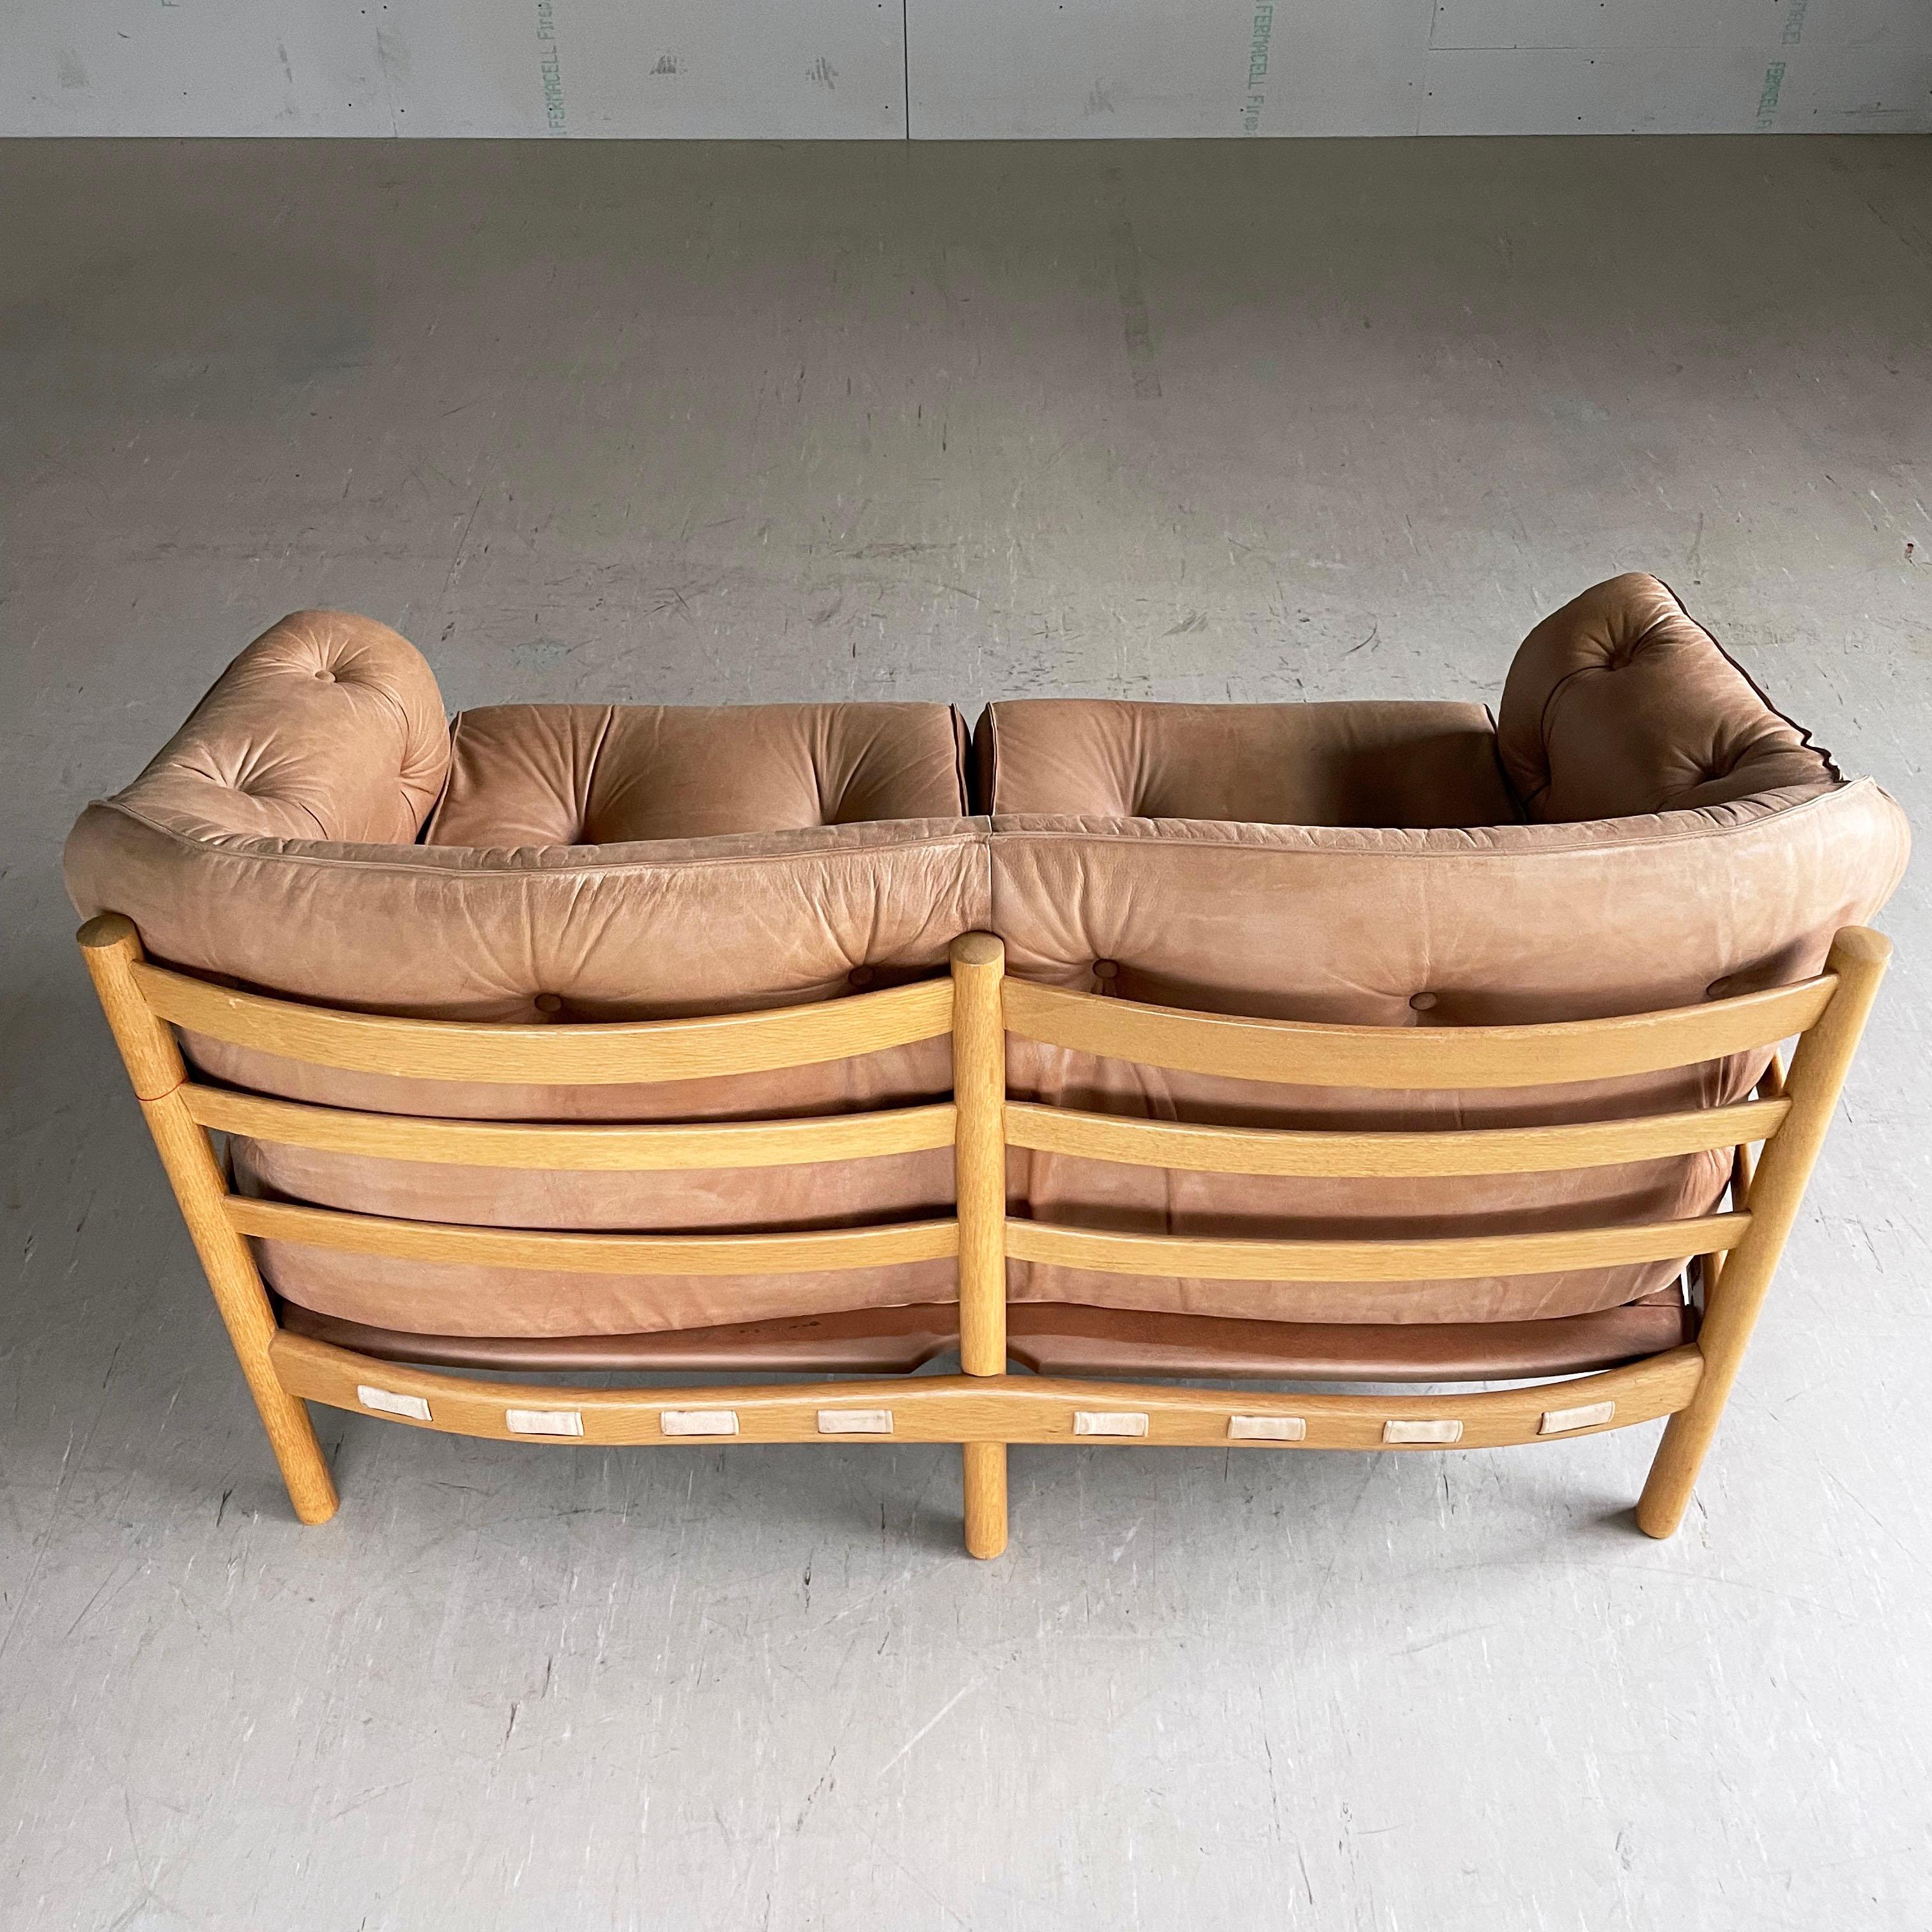 Mid-20th Century Sven Ellekaer leather sofa produced by Coja For Sale